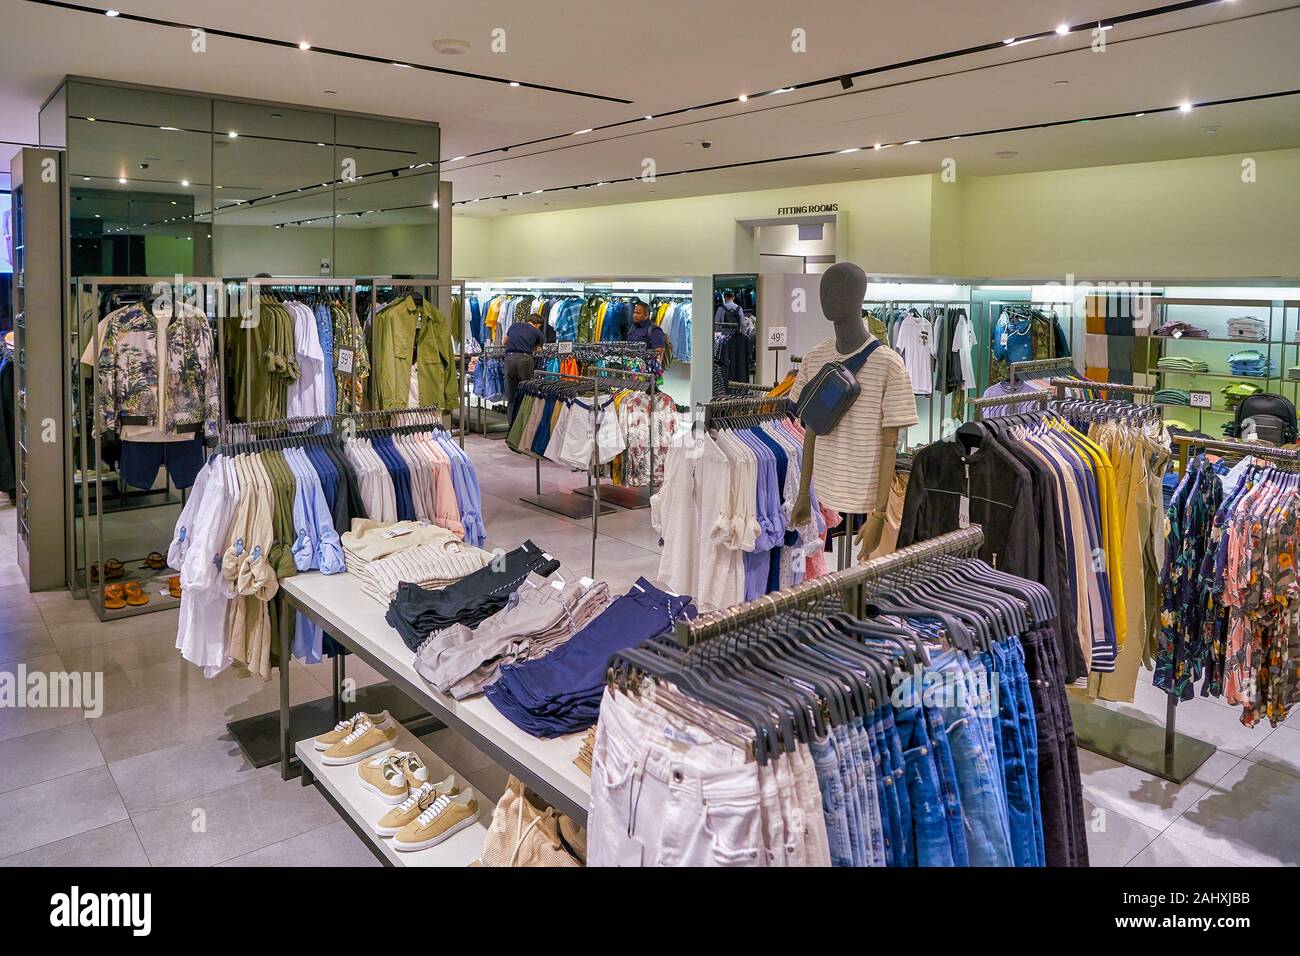 SINGAPORE - CIRCA APRIL, 2019: clothes on display at Zara store in